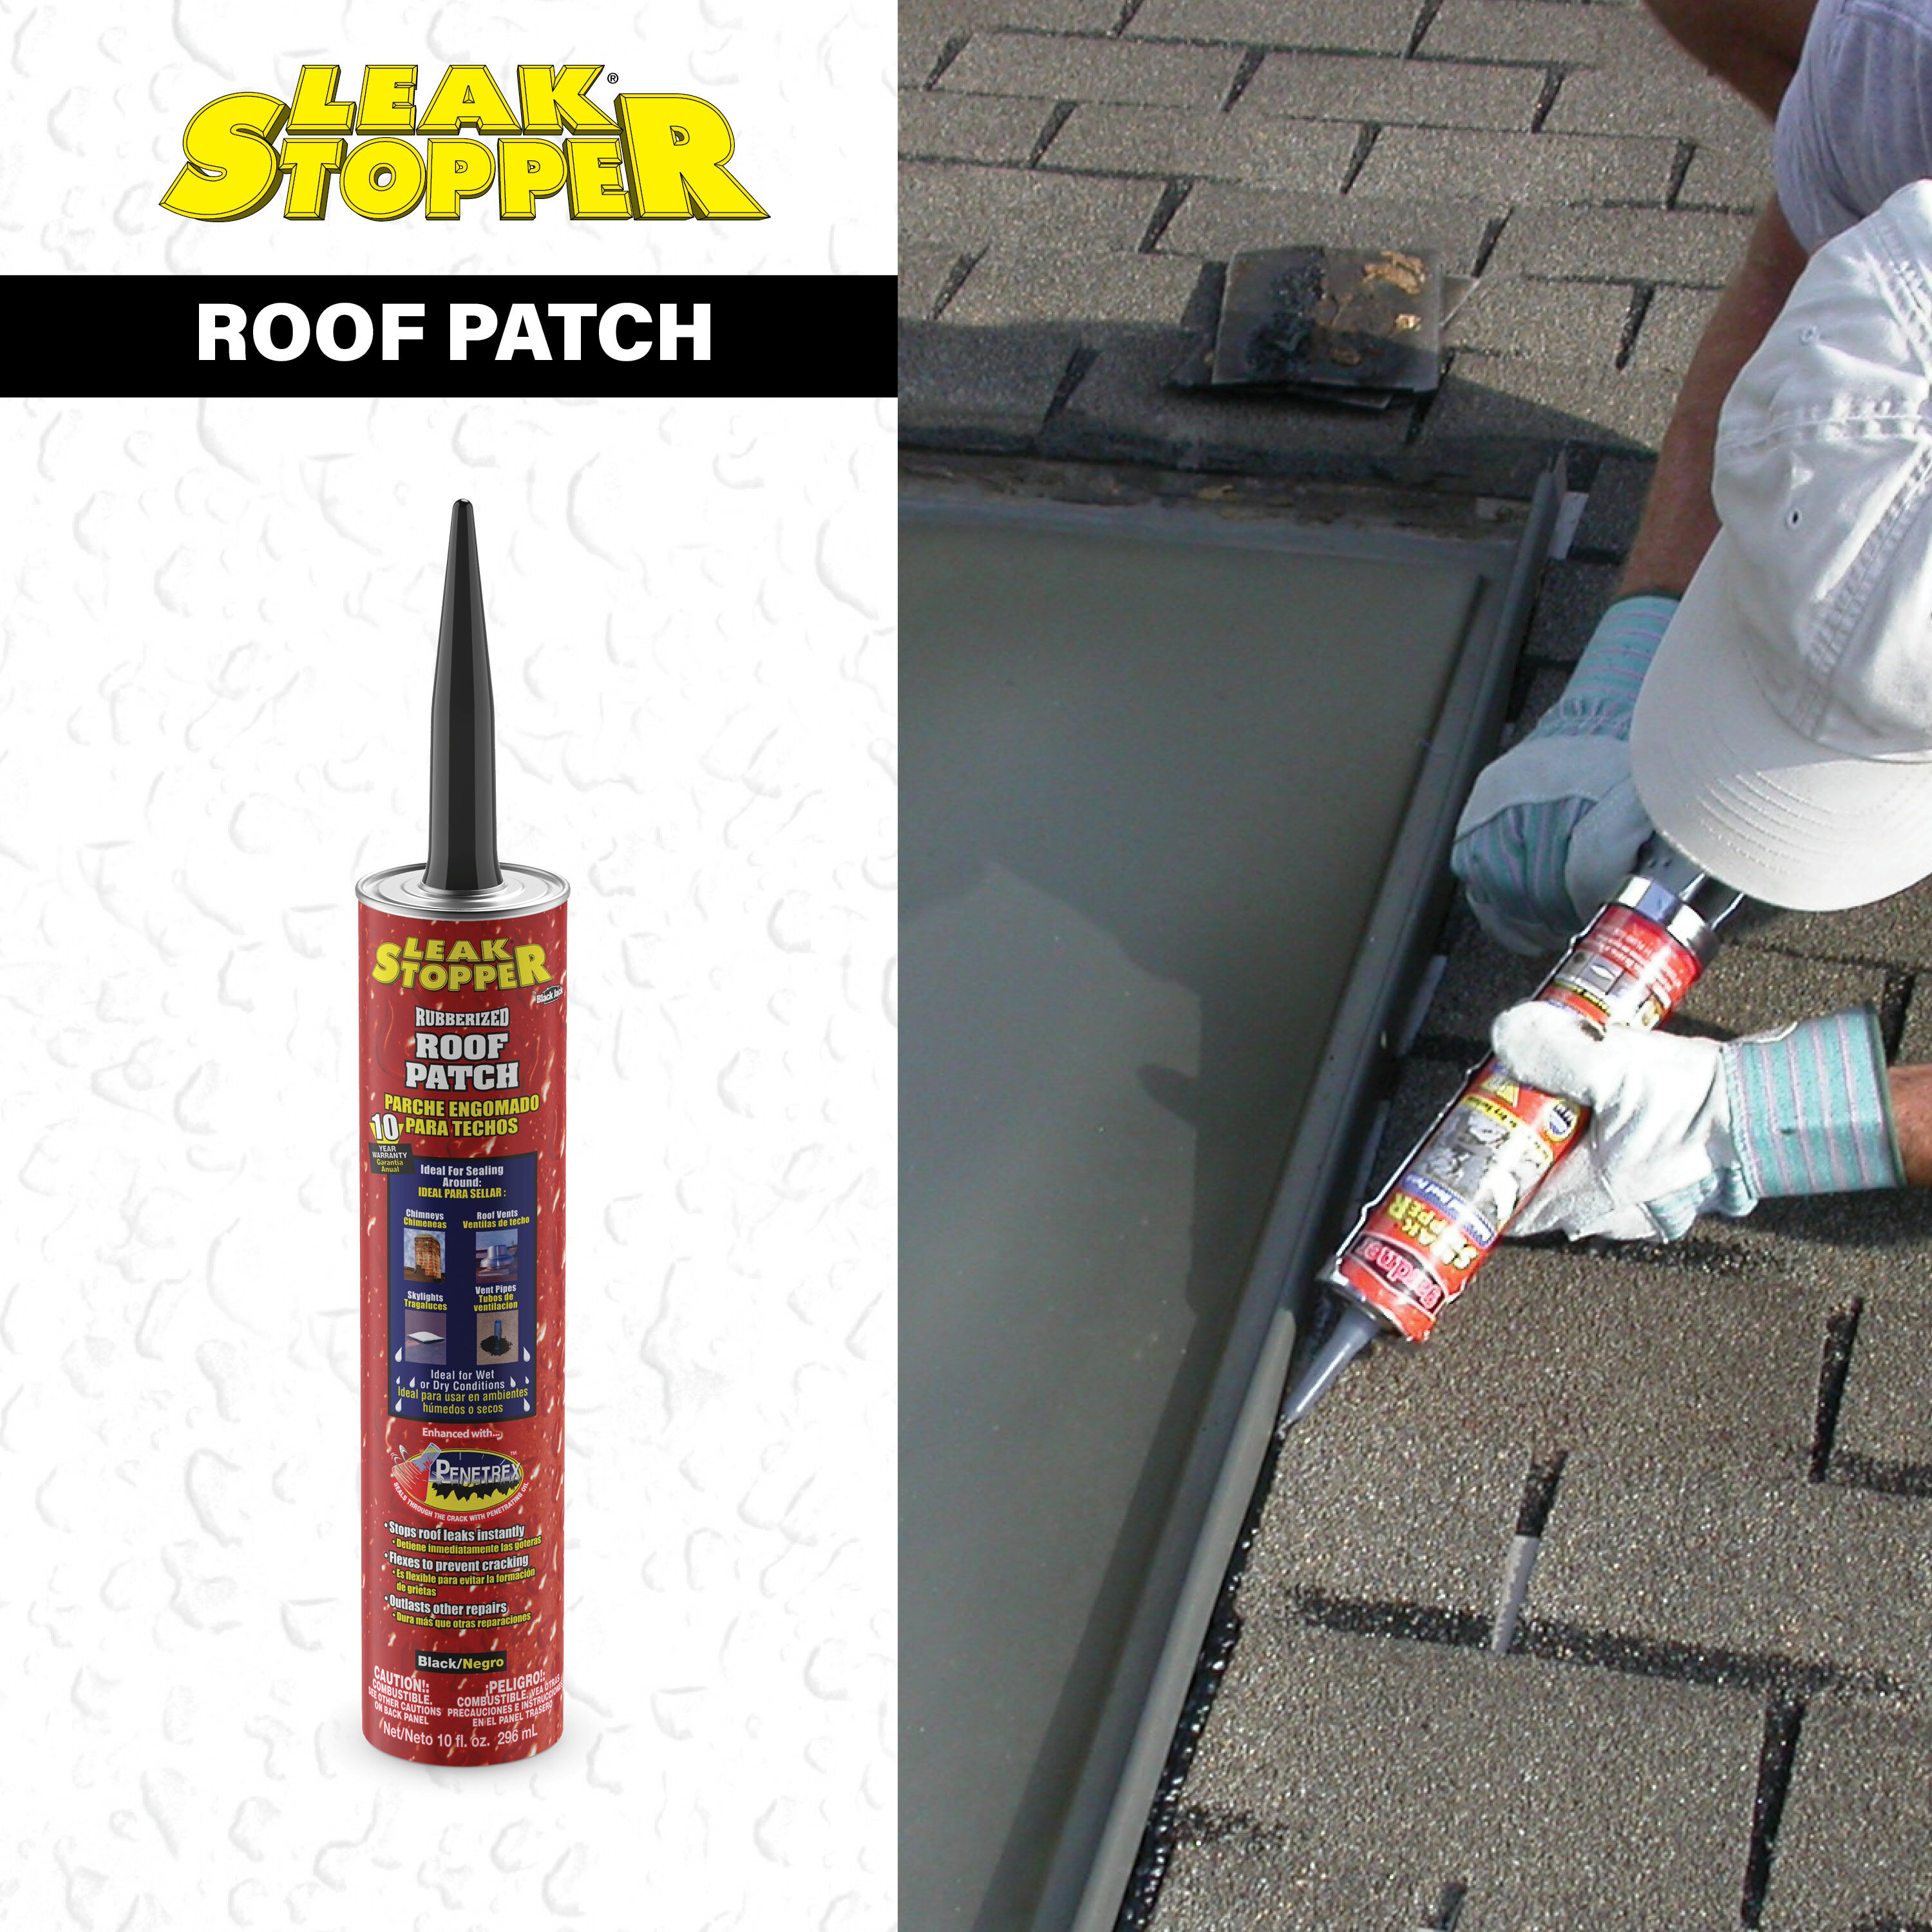 how to use leak stopper rubberized roof patch 